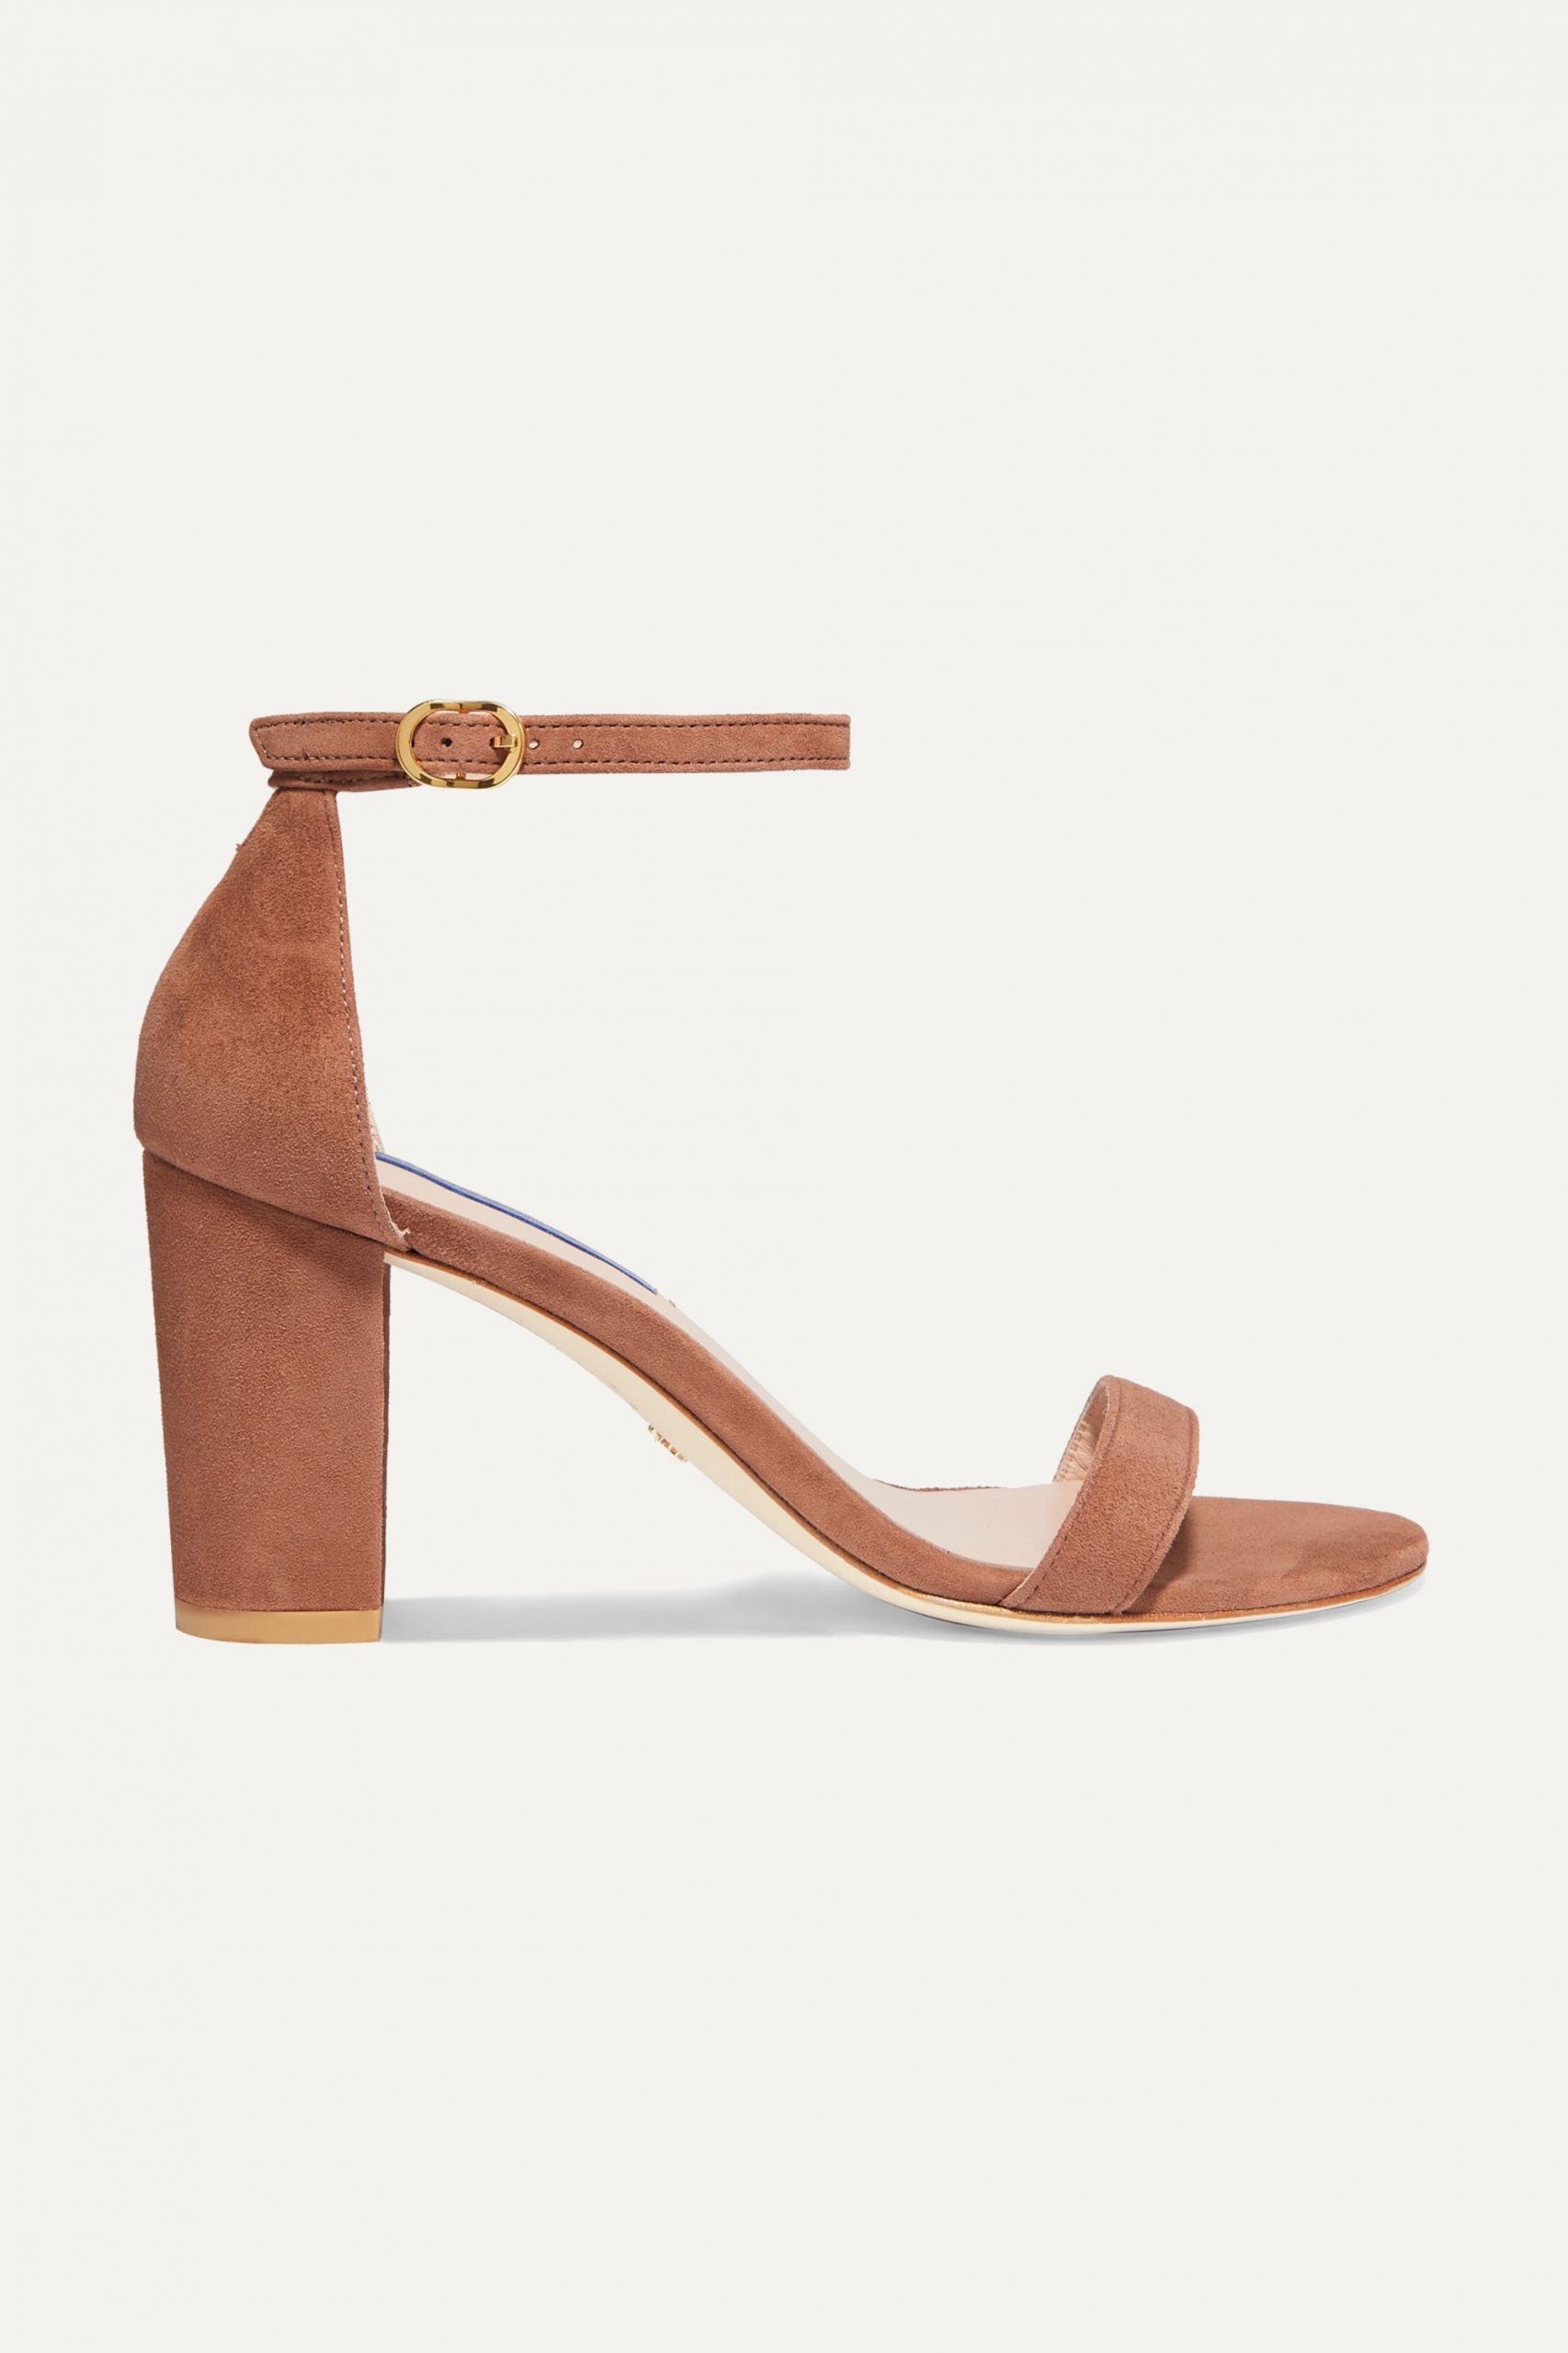 Stuart Weitzman - Nearlynude Suede Sandals | ABOUT ICONS